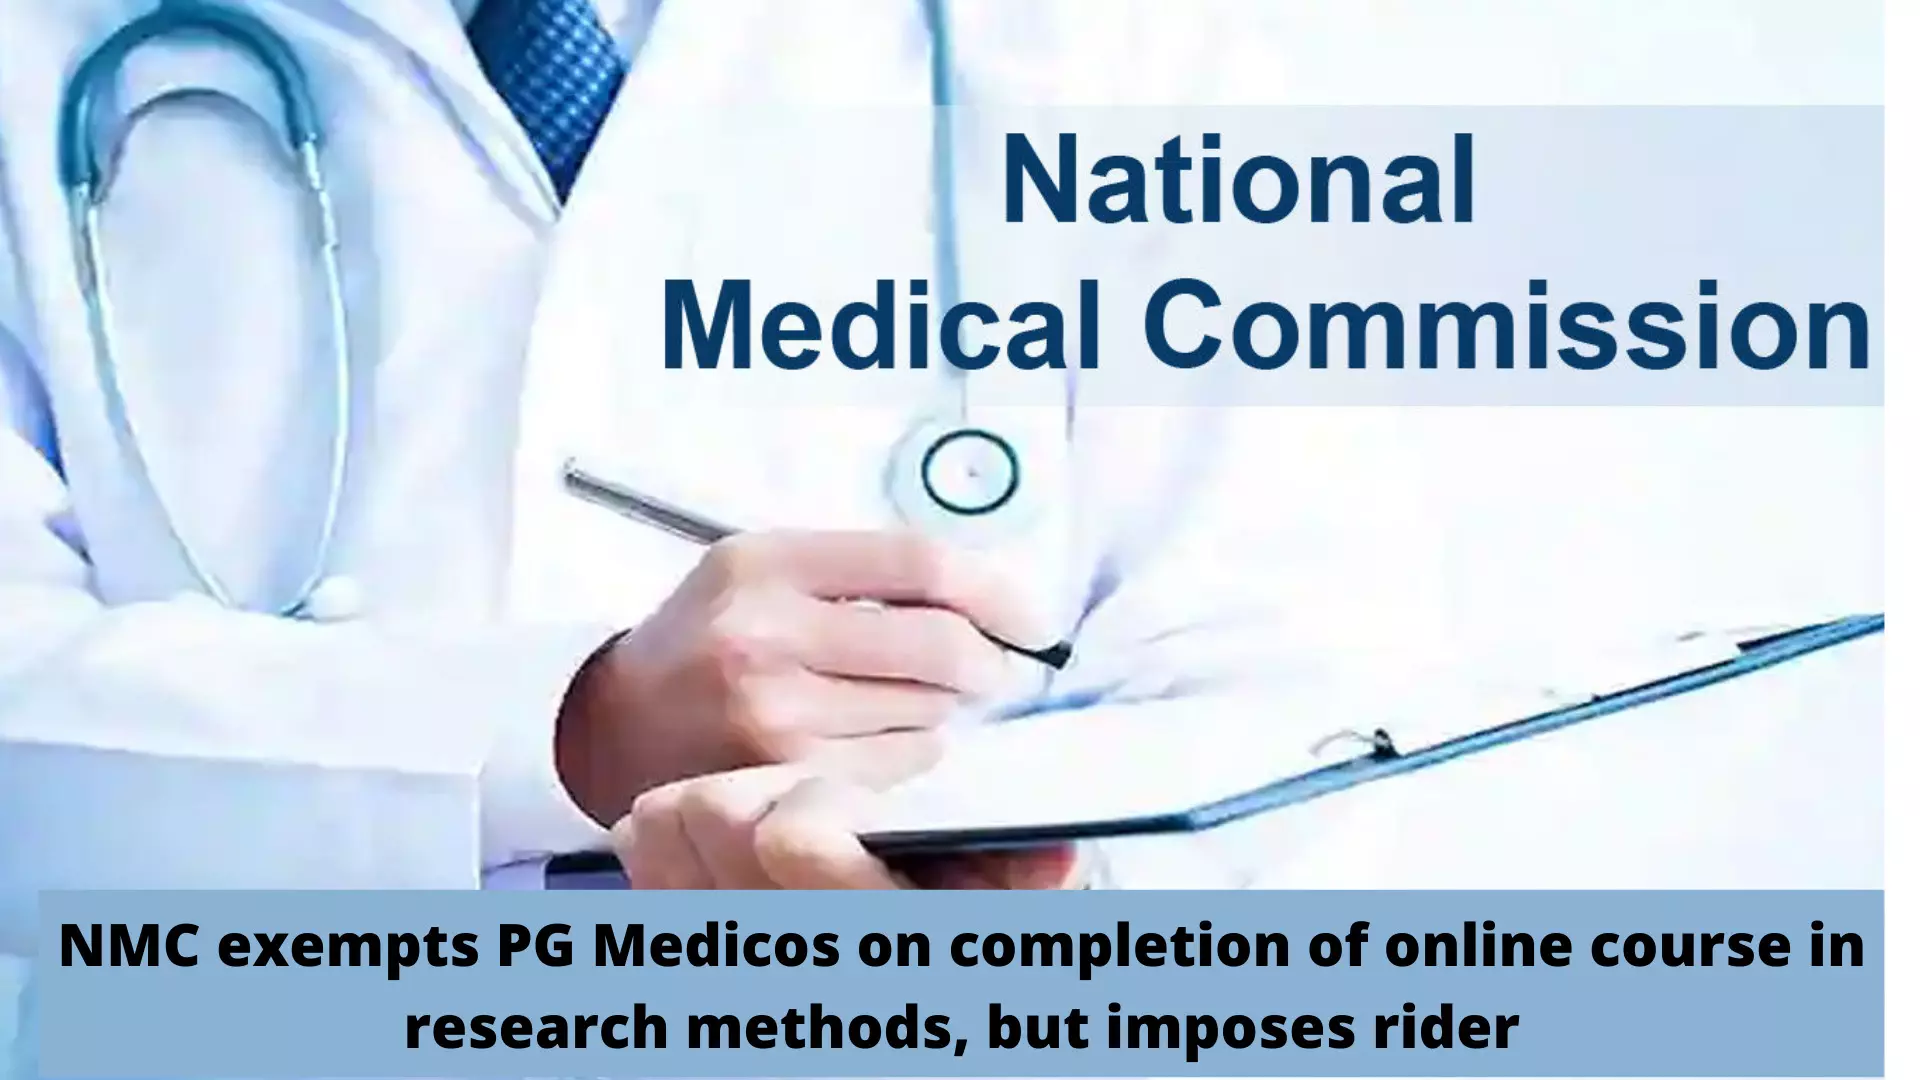 NMC exempts PG Medicos on completion of online course in research methods, but imposes rider